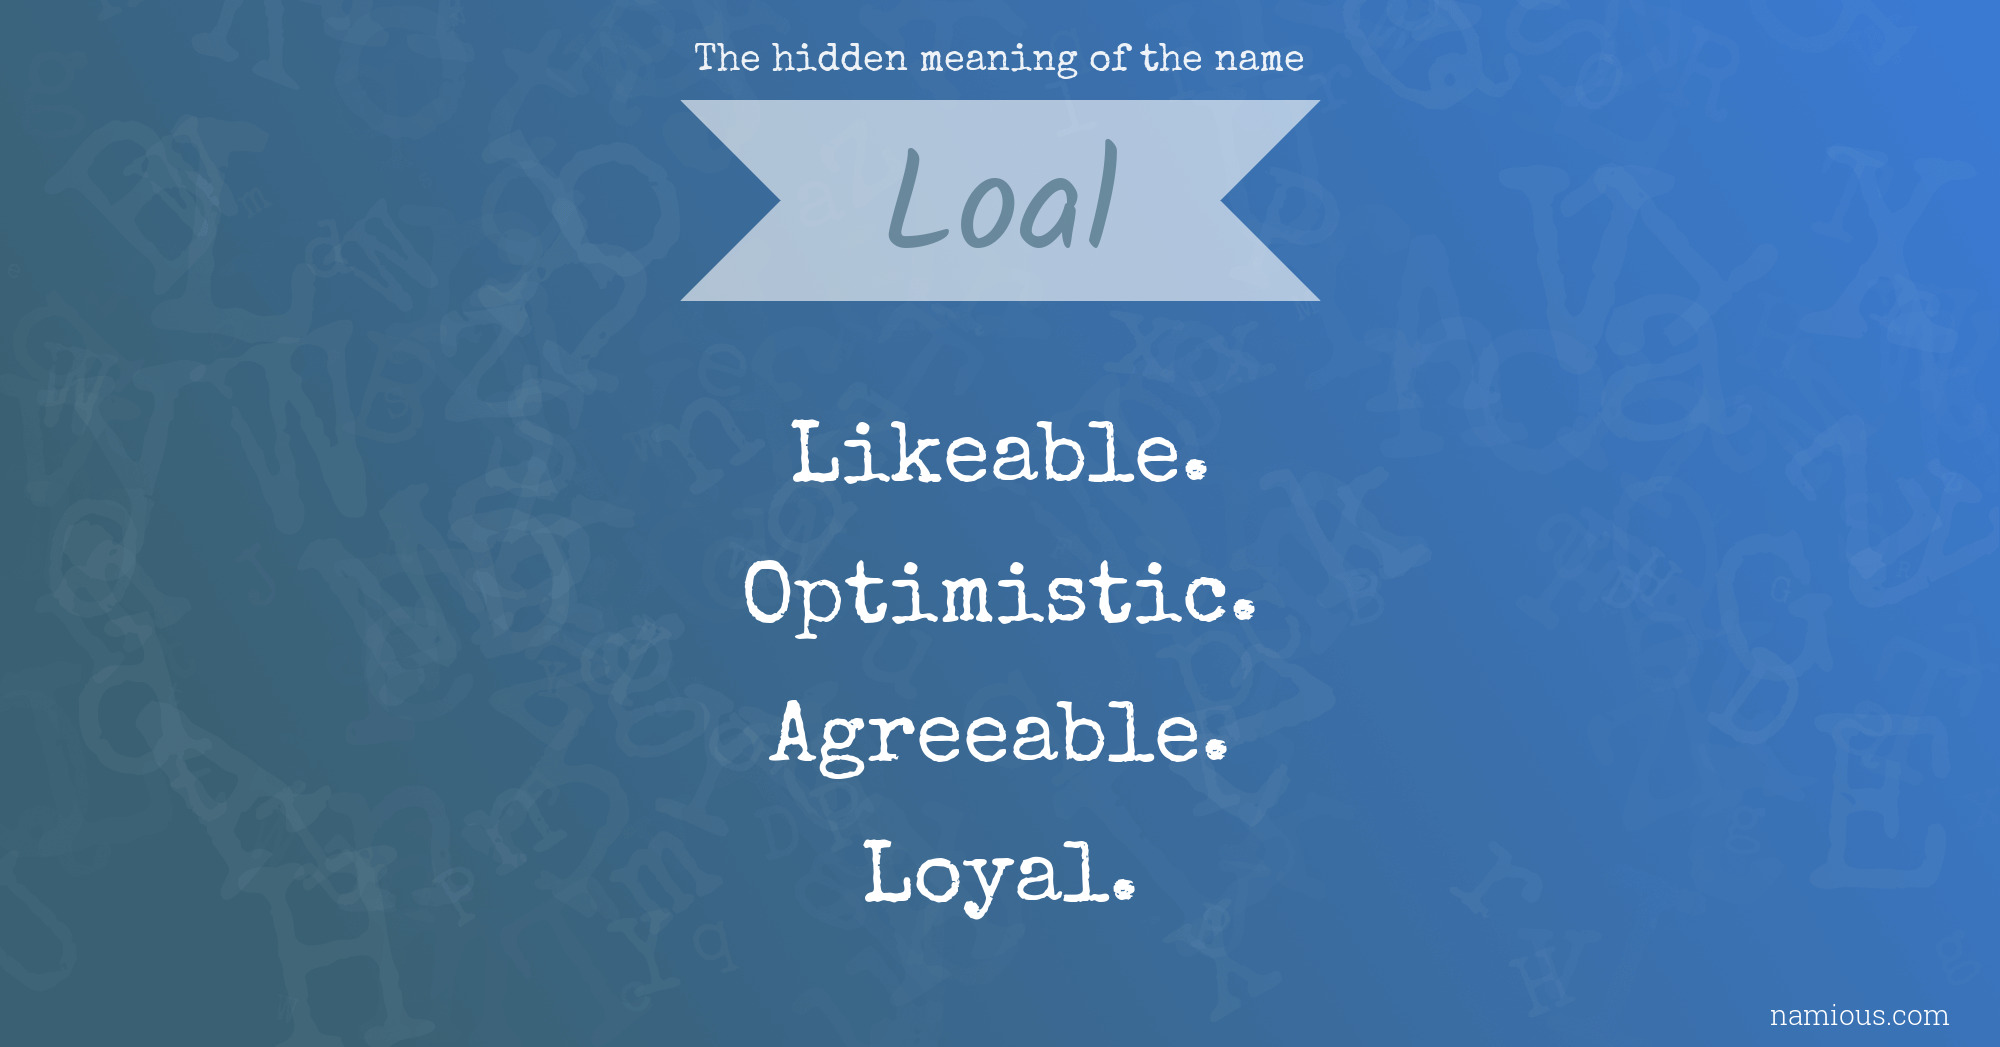 The hidden meaning of the name Loal